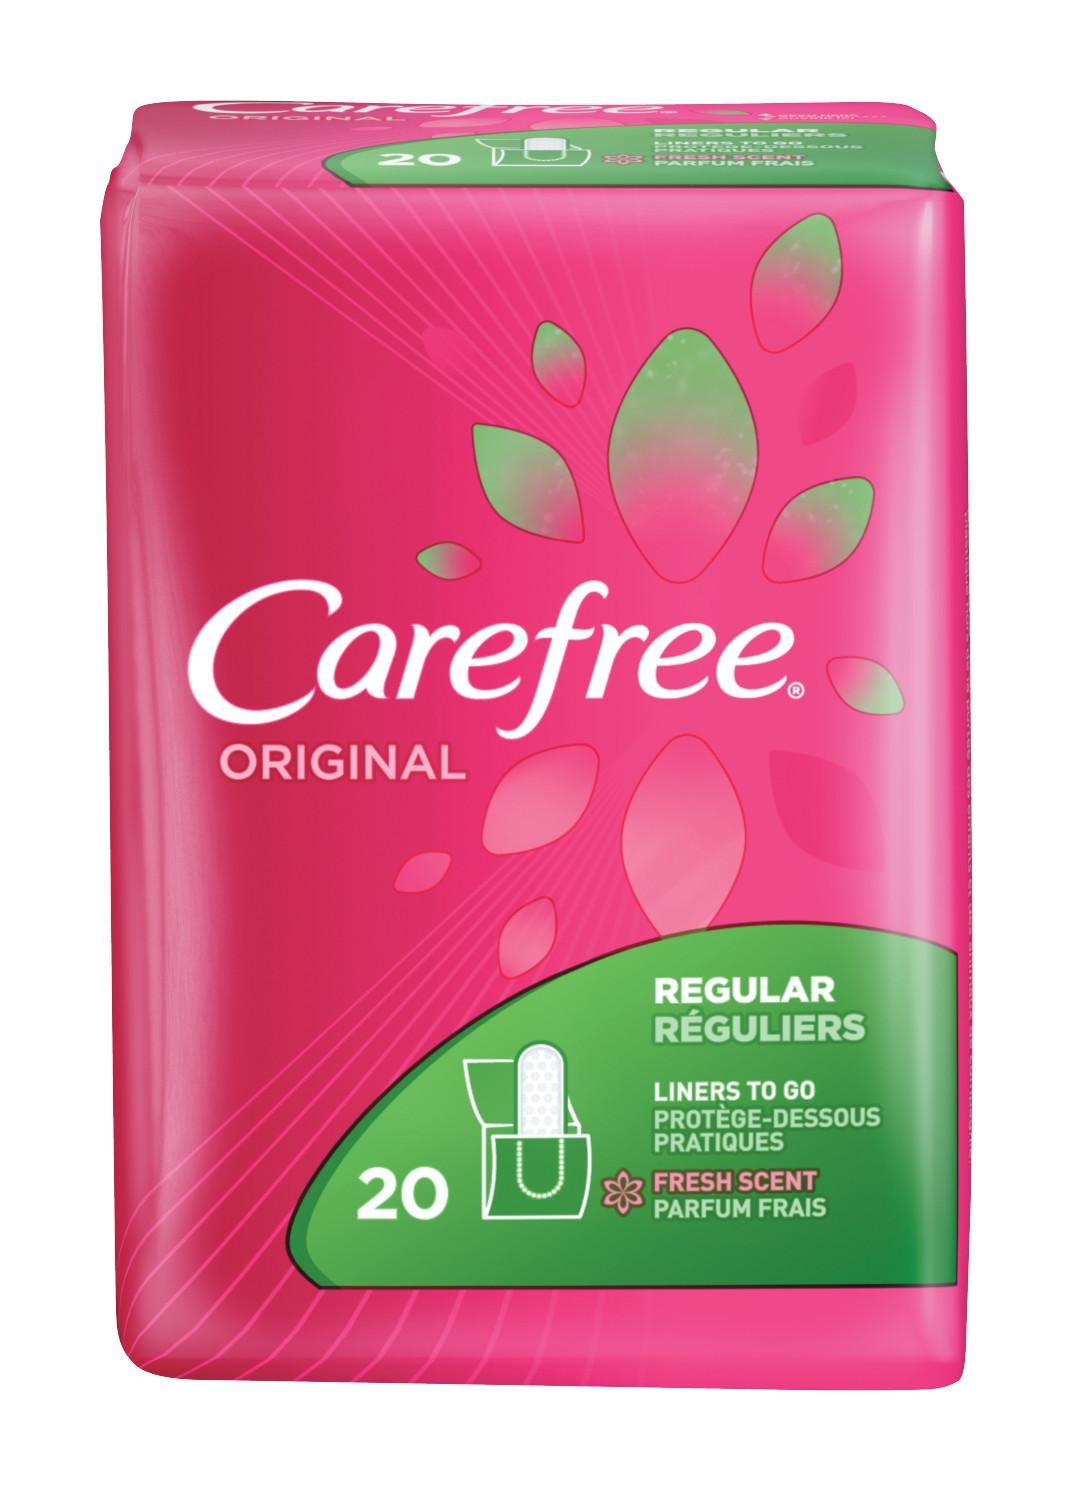 Carefree Original Liners to Go Regular Fresh Scent 20 Each by Carefree